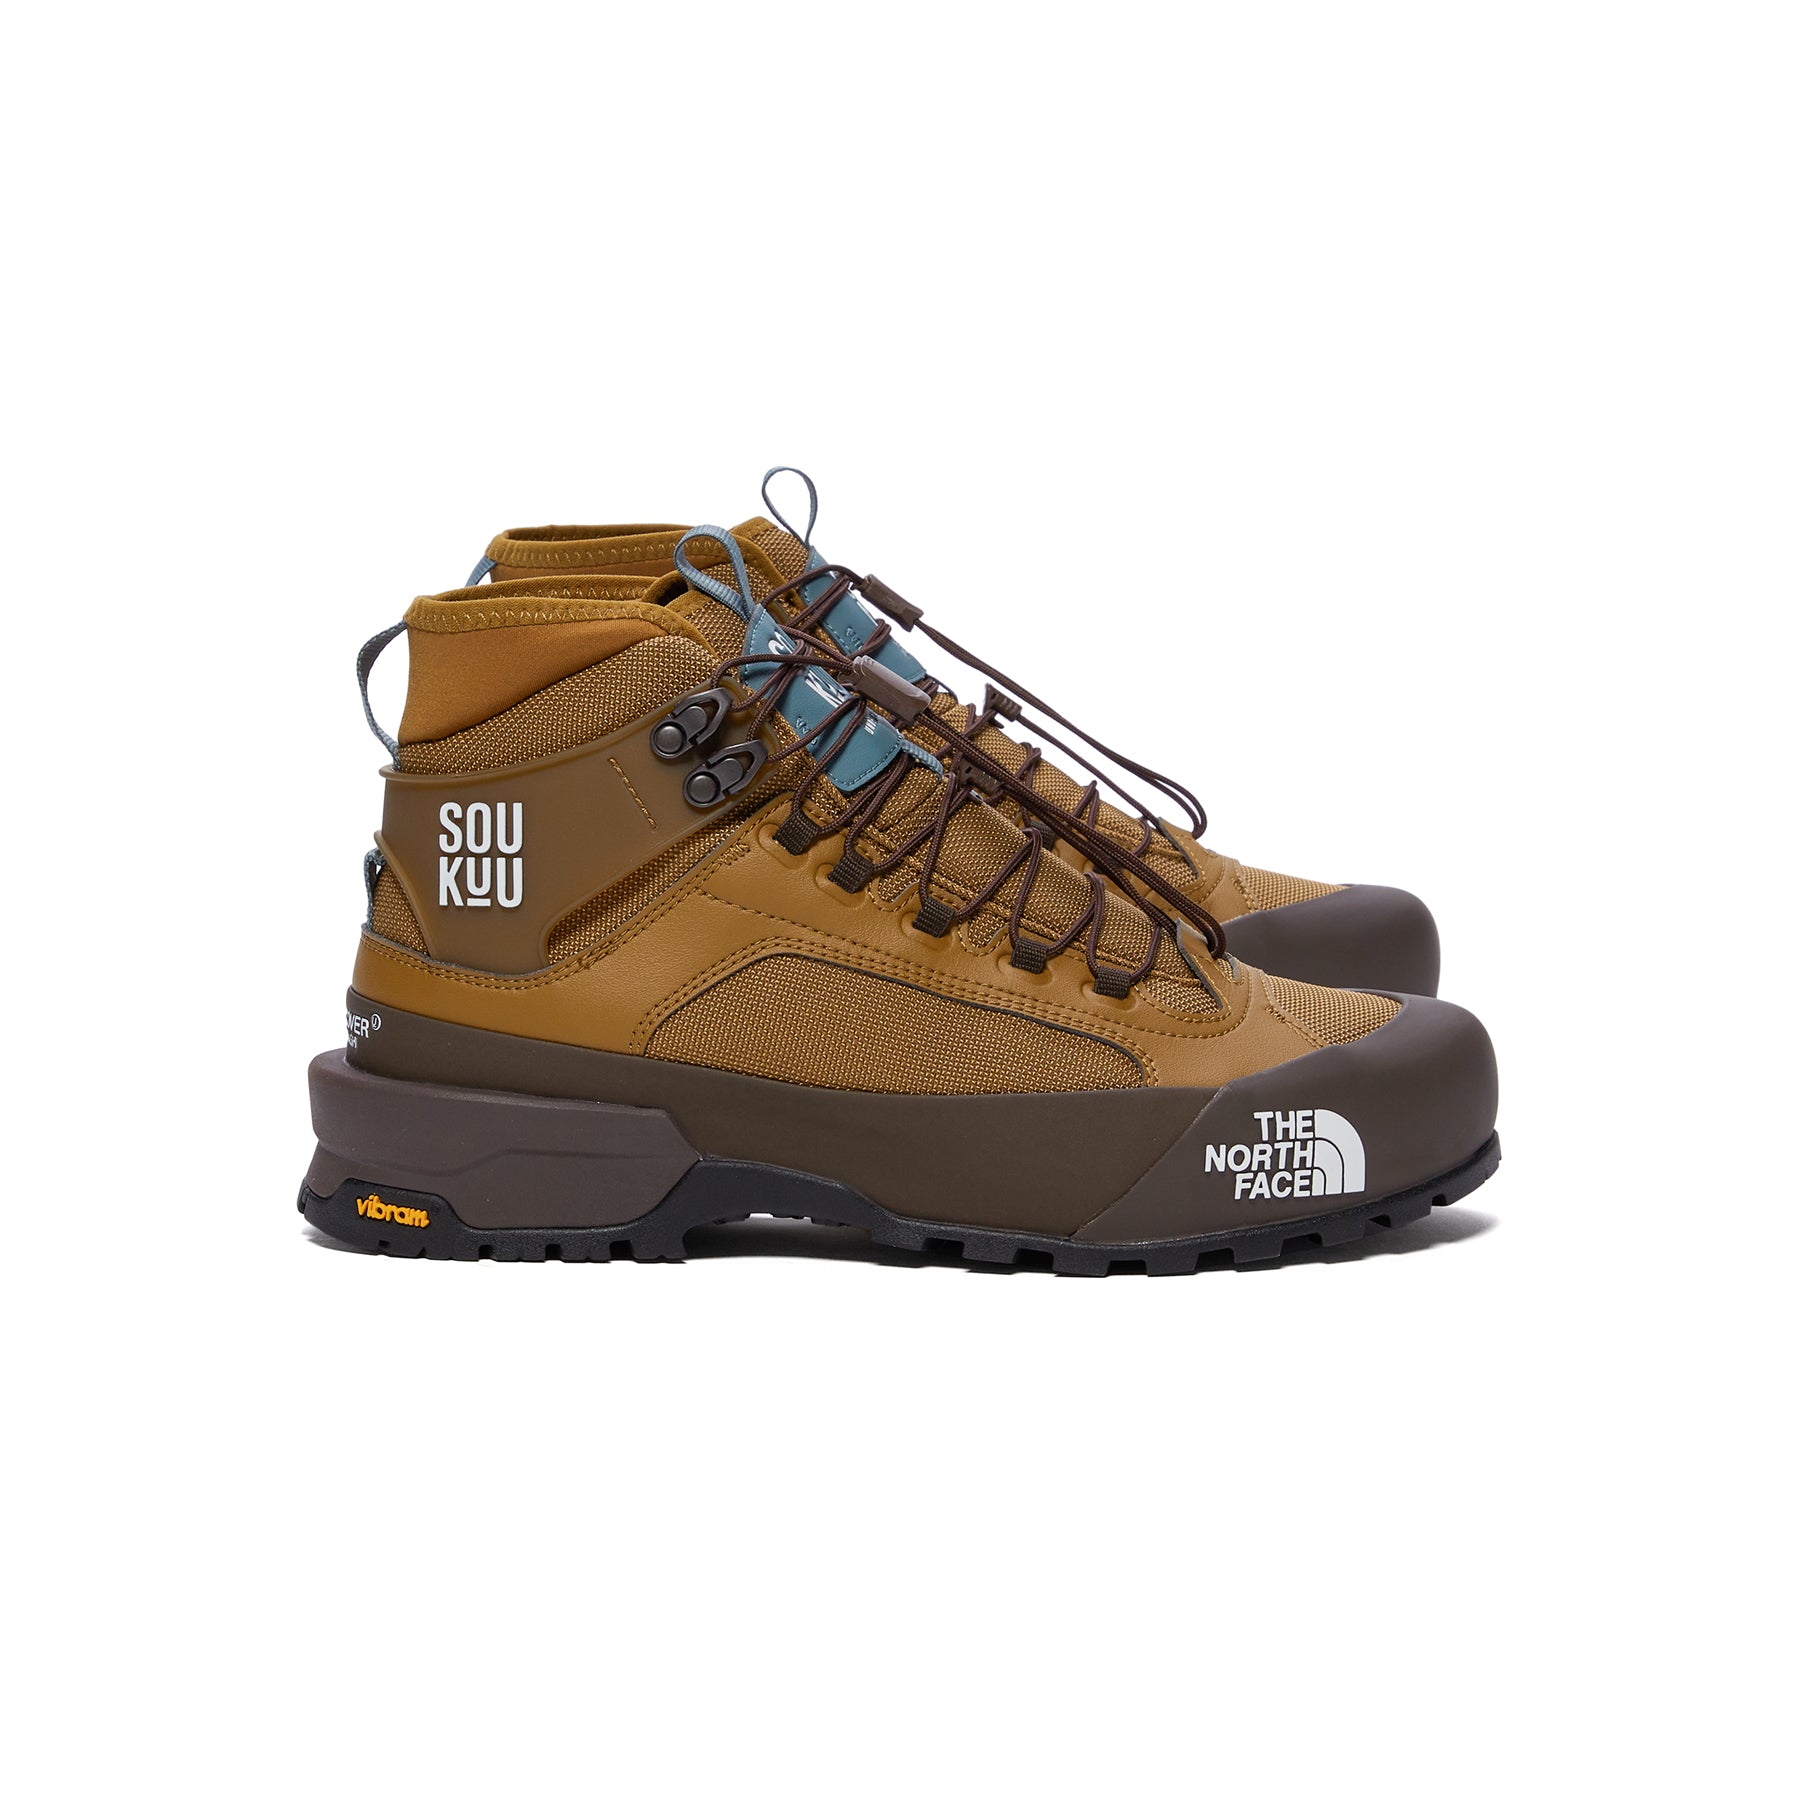 The North Face X Undercover Soukuu Glenclyffe (BRONZE BROWN 